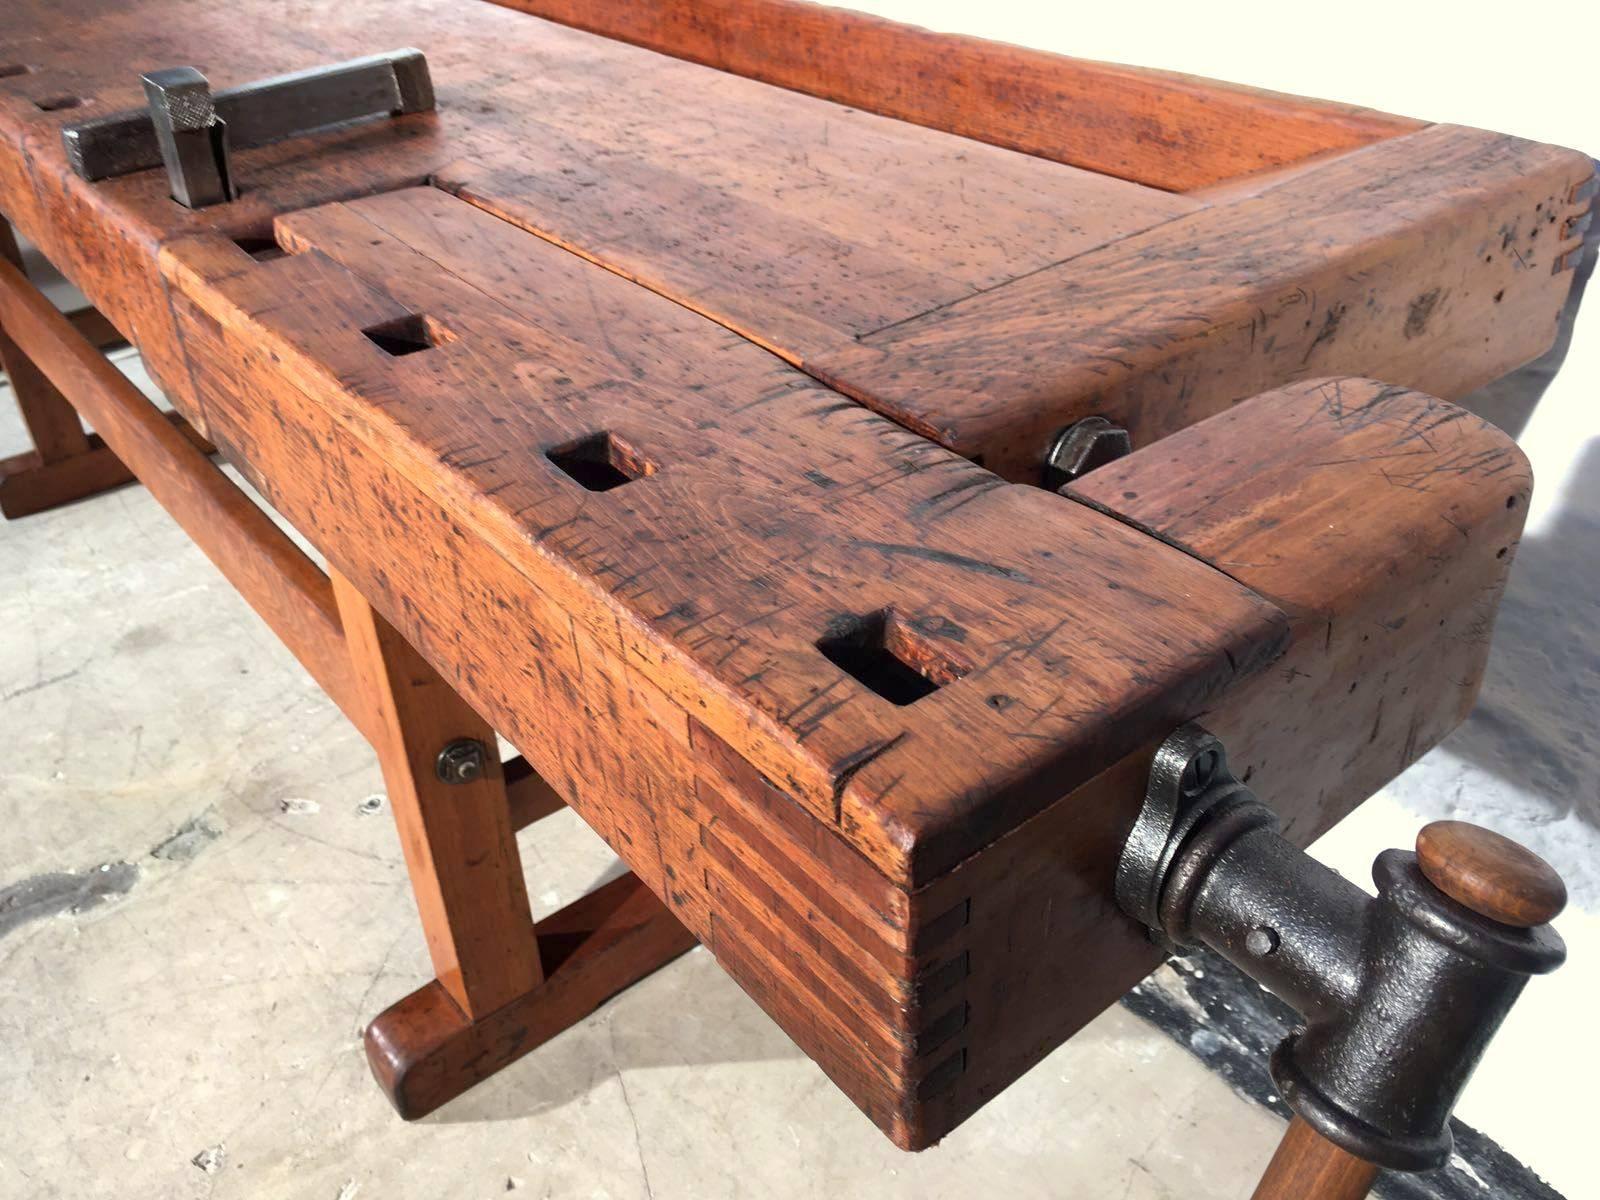 Wonderful German workbench with warm and bold patina. It was in traditional use and restored afterwards with a wonderful finish.